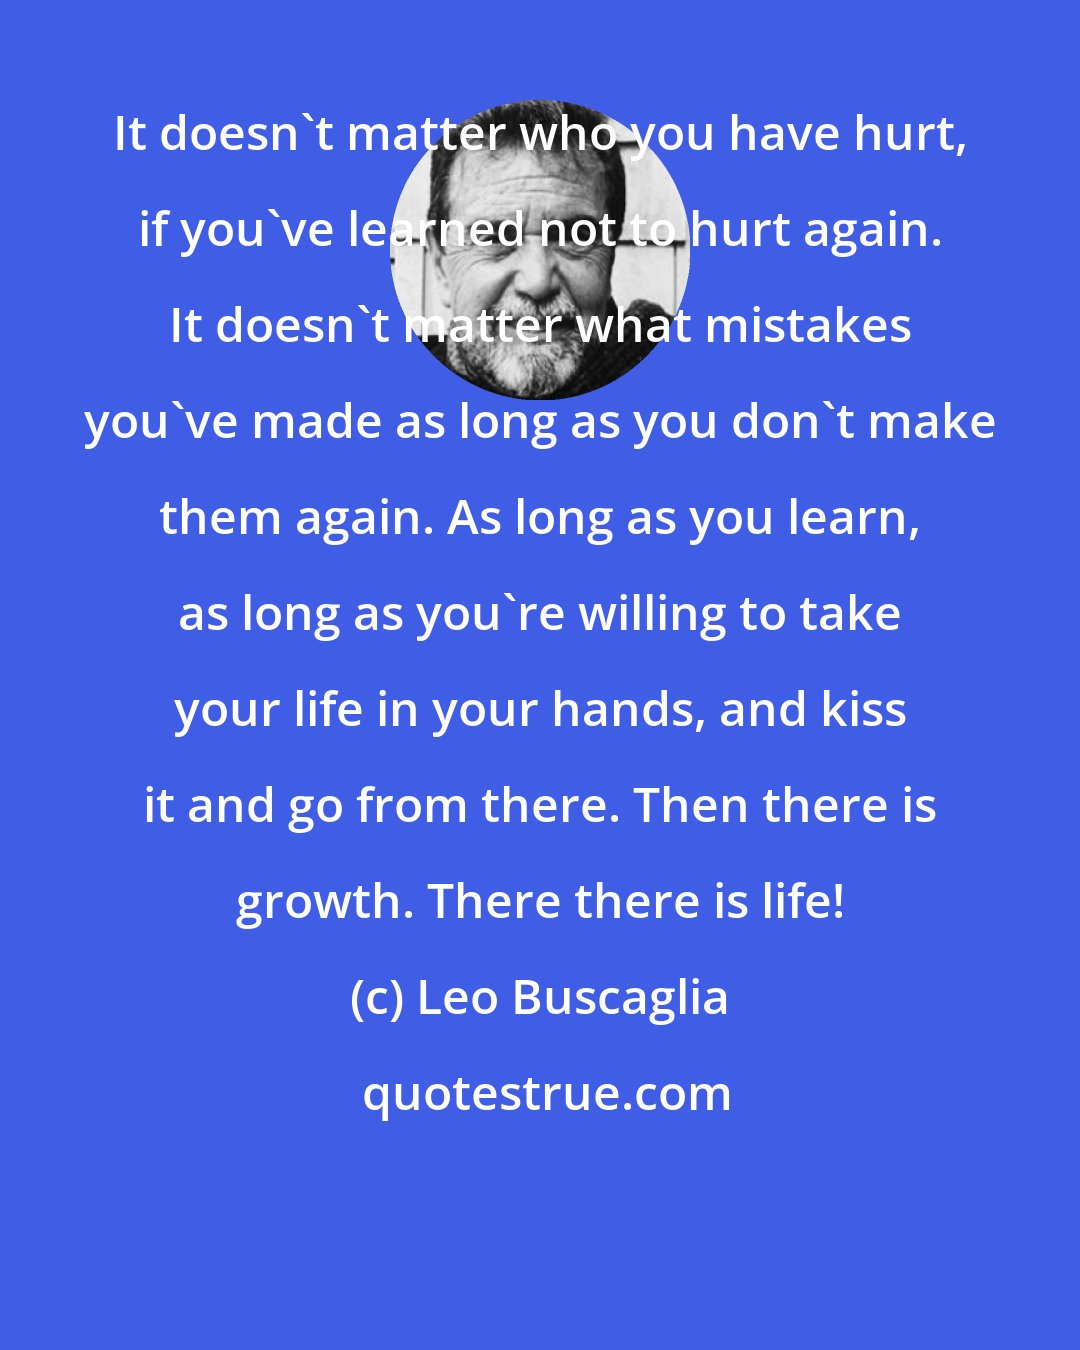 Leo Buscaglia: It doesn't matter who you have hurt, if you've learned not to hurt again. It doesn't matter what mistakes you've made as long as you don't make them again. As long as you learn, as long as you're willing to take your life in your hands, and kiss it and go from there. Then there is growth. There there is life!